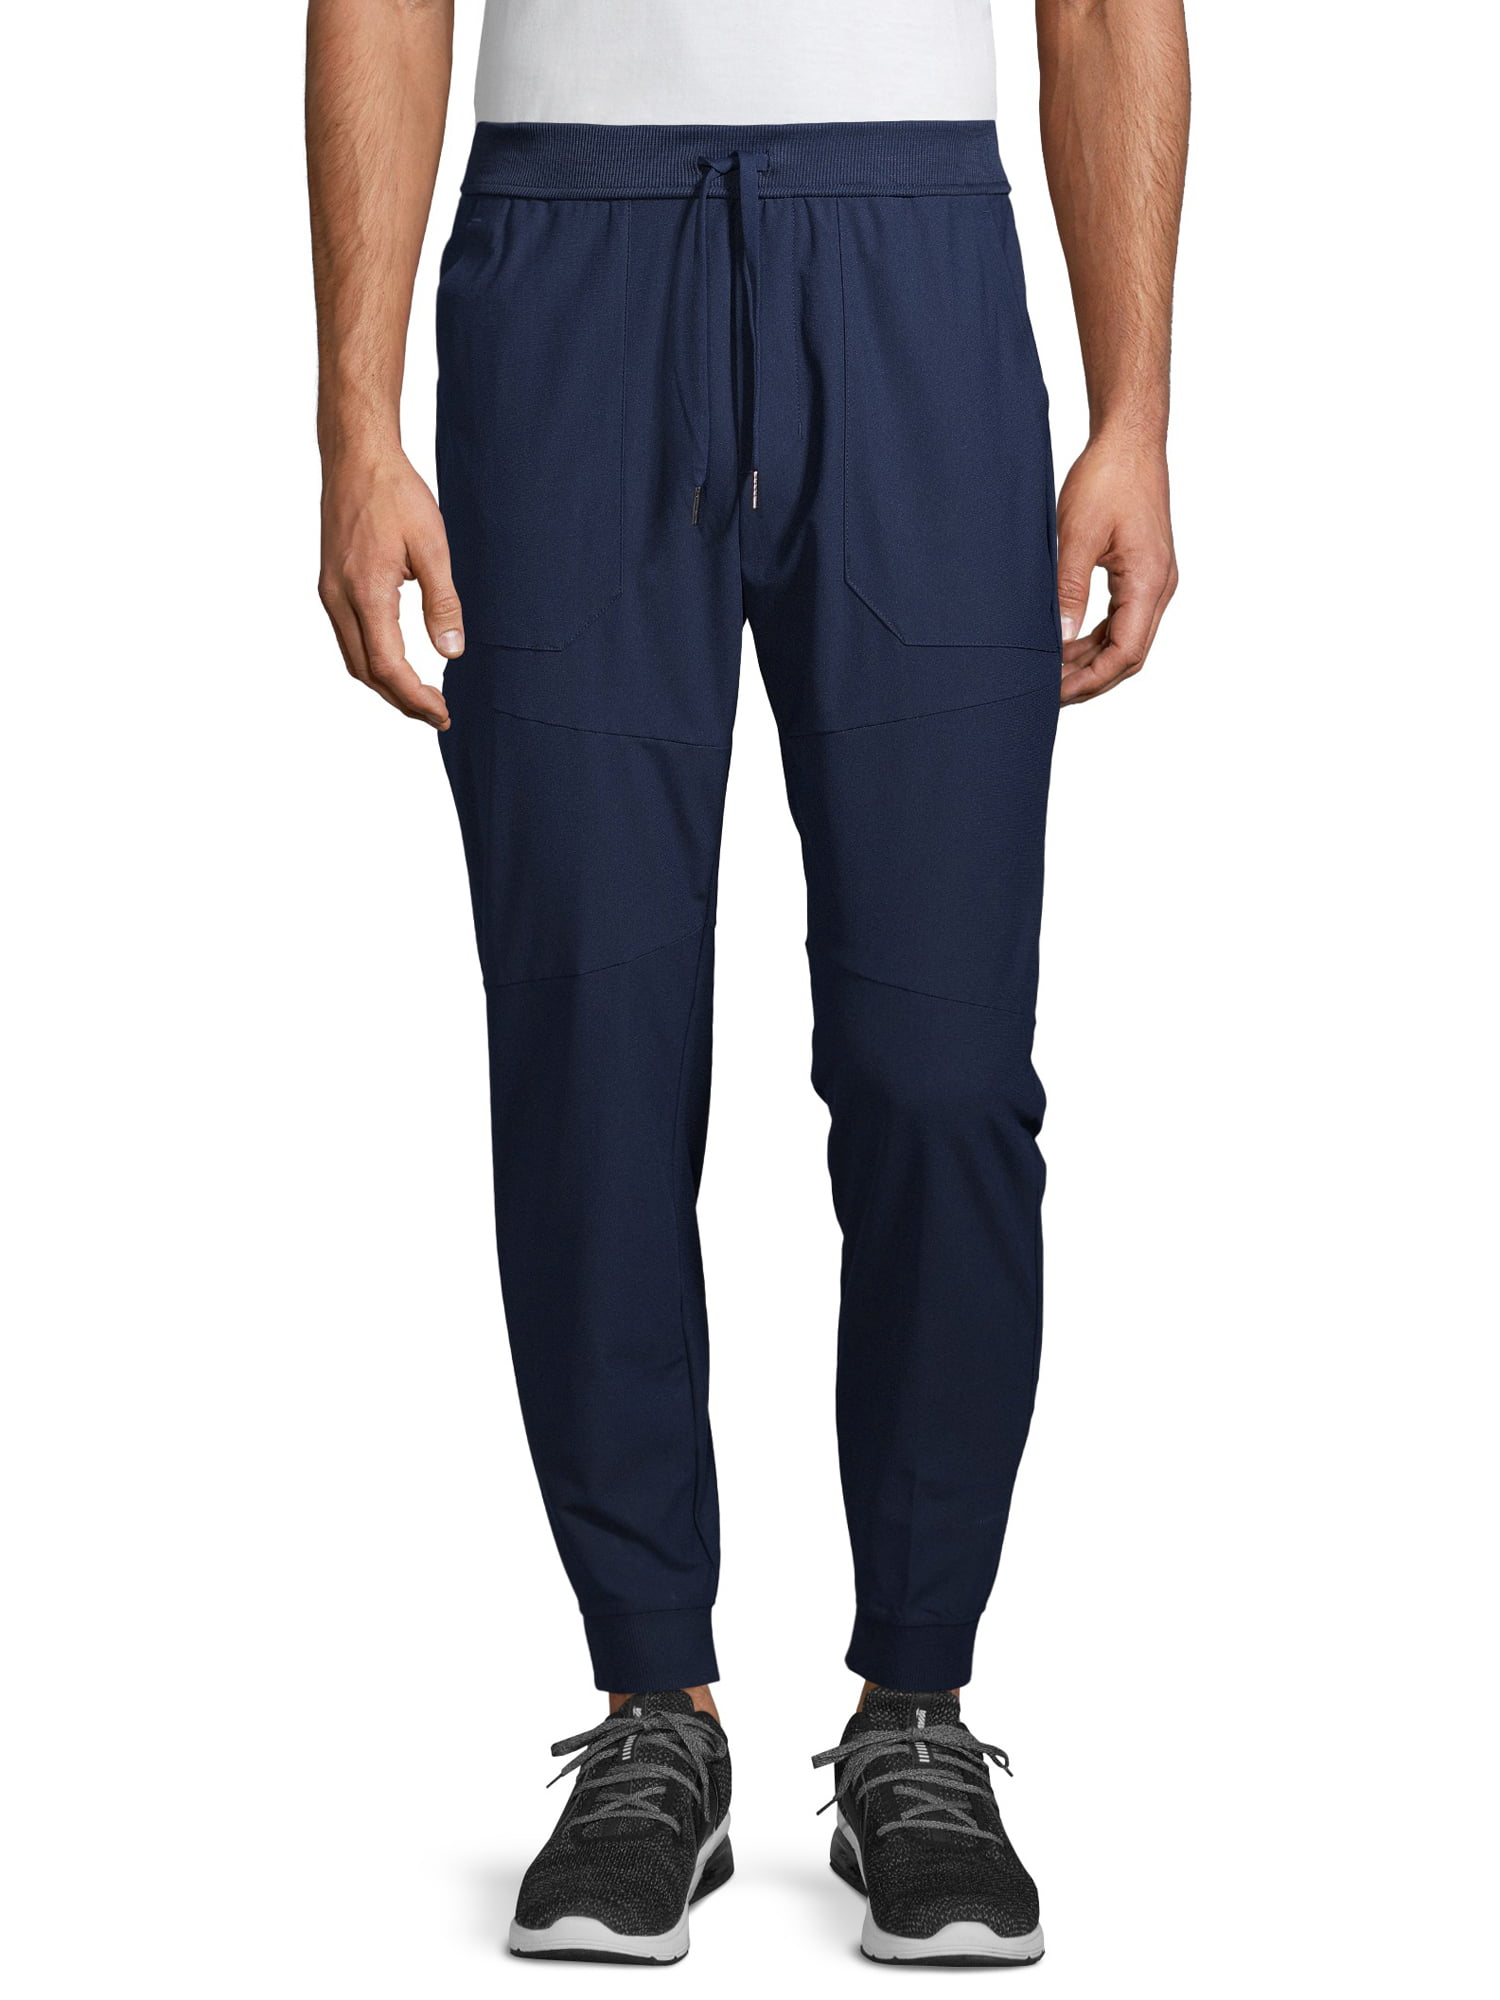 Russell Men's and Big Men's Woven Performance Joggers, up to 5XL ...